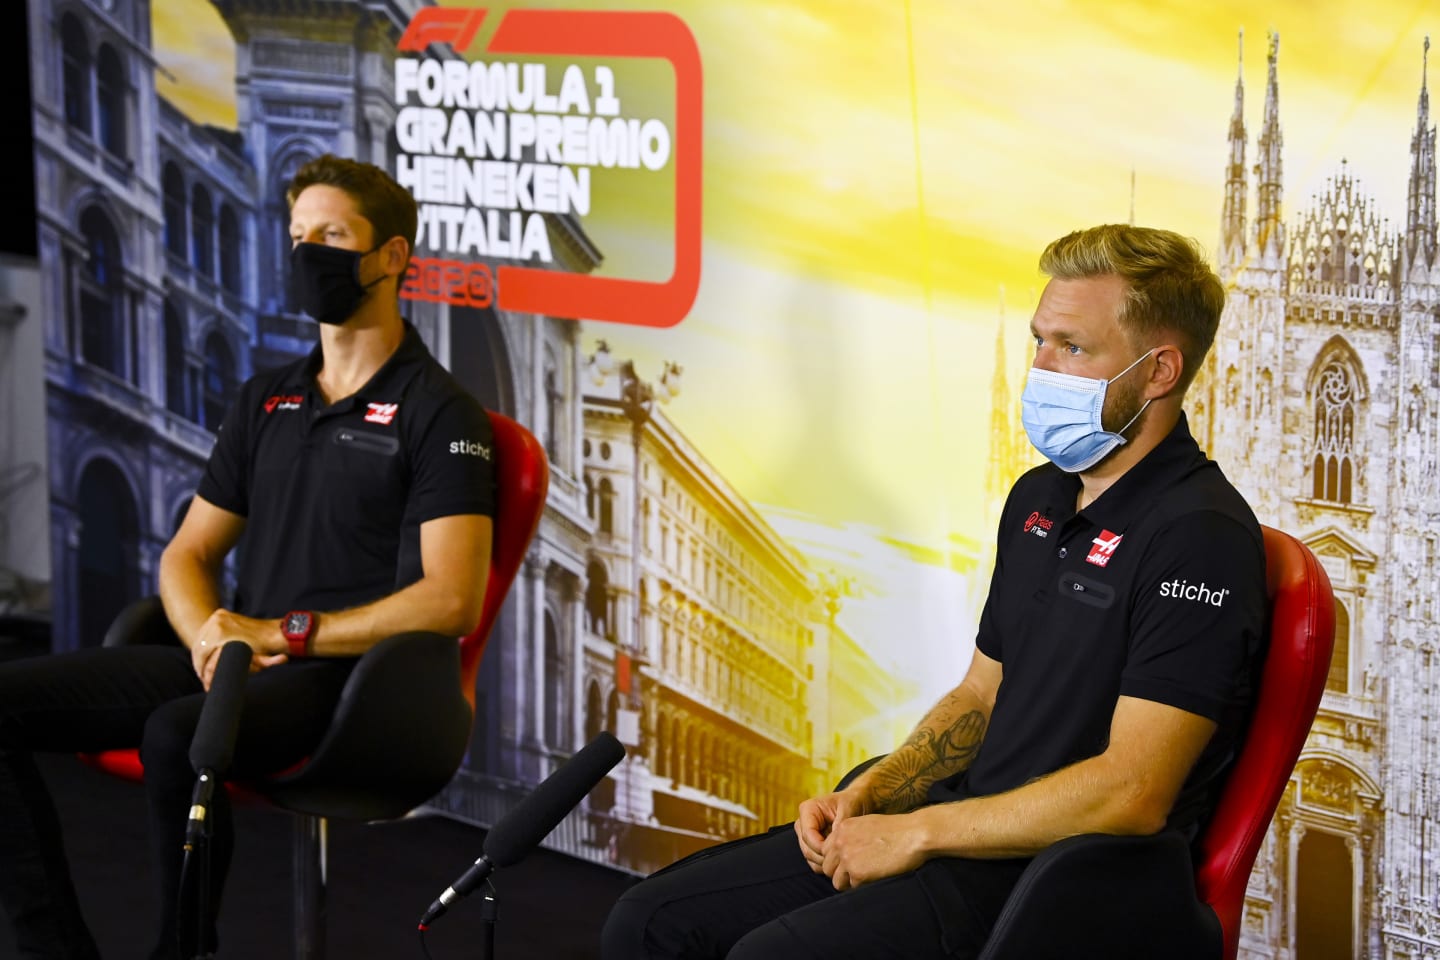 MONZA, ITALY - SEPTEMBER 03: Kevin Magnussen of Denmark and Haas F1 and Romain Grosjean of France